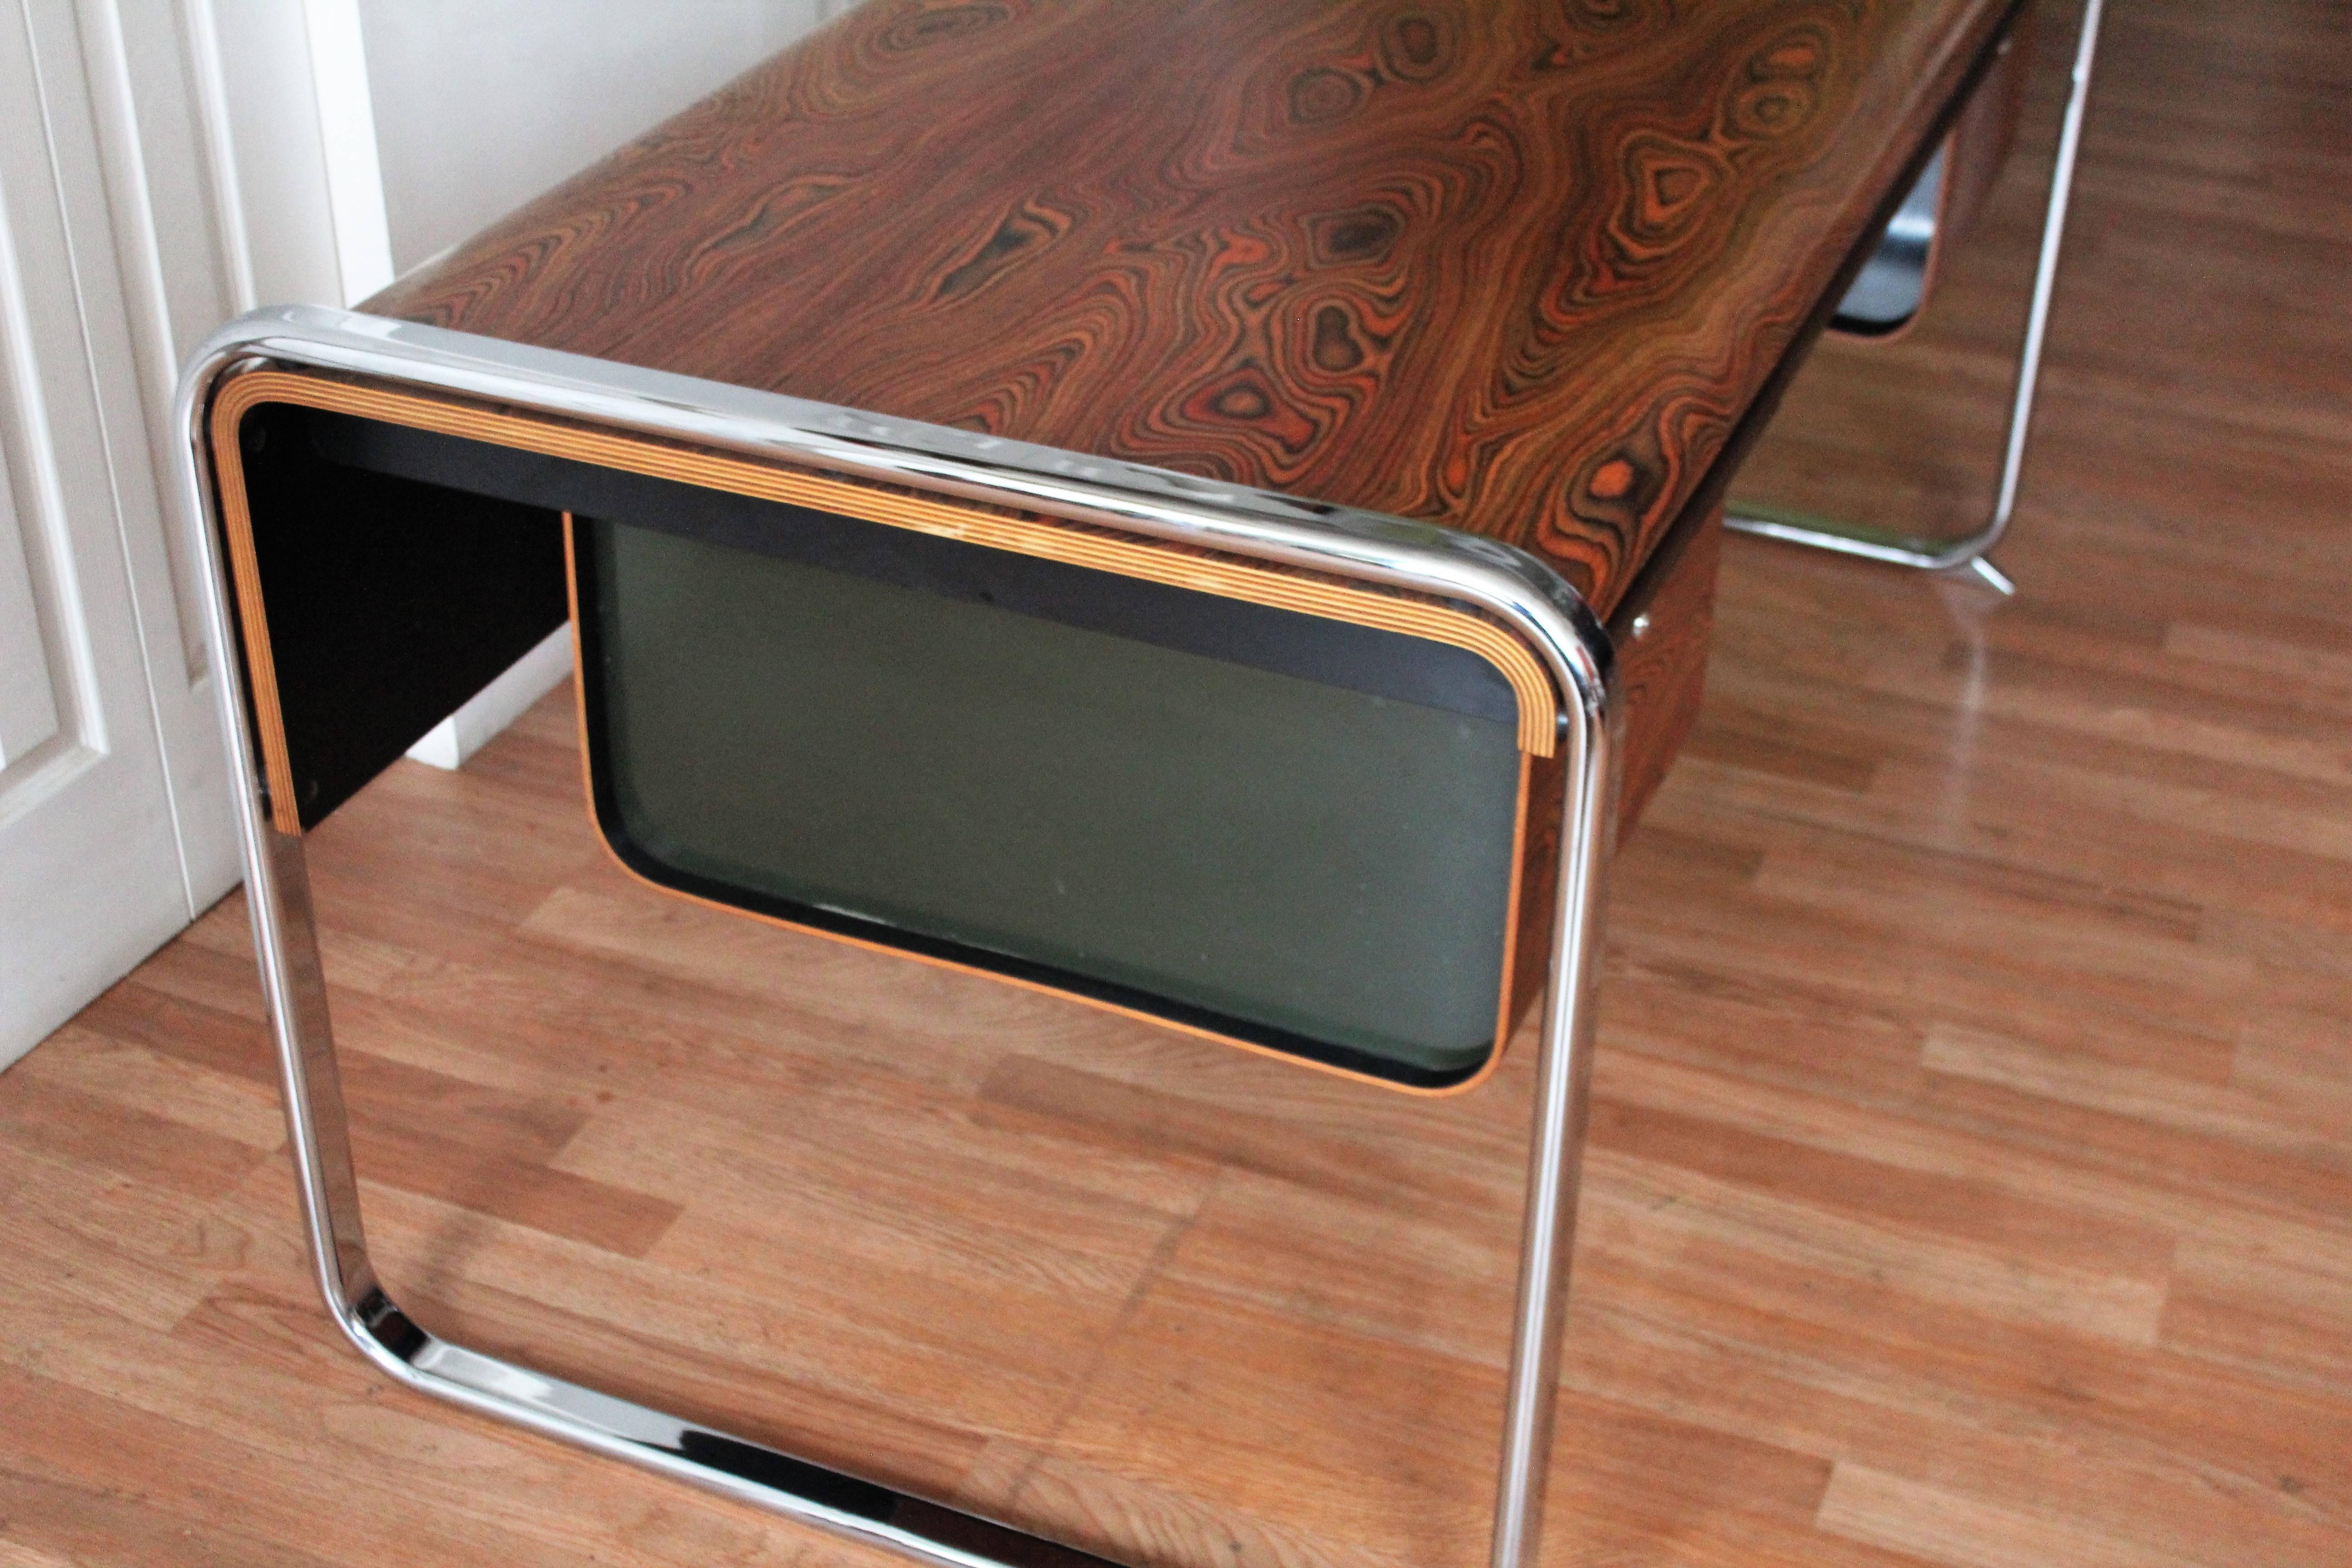 African Zebra wood desk designed by Peter Protzman for Herman Miller with a wrap around chrome frame. Theres a pull-out pencil drawer nestled in the middle and two black Lucite lined file drawers that flank both sides. Note: The Zebra wood is awe